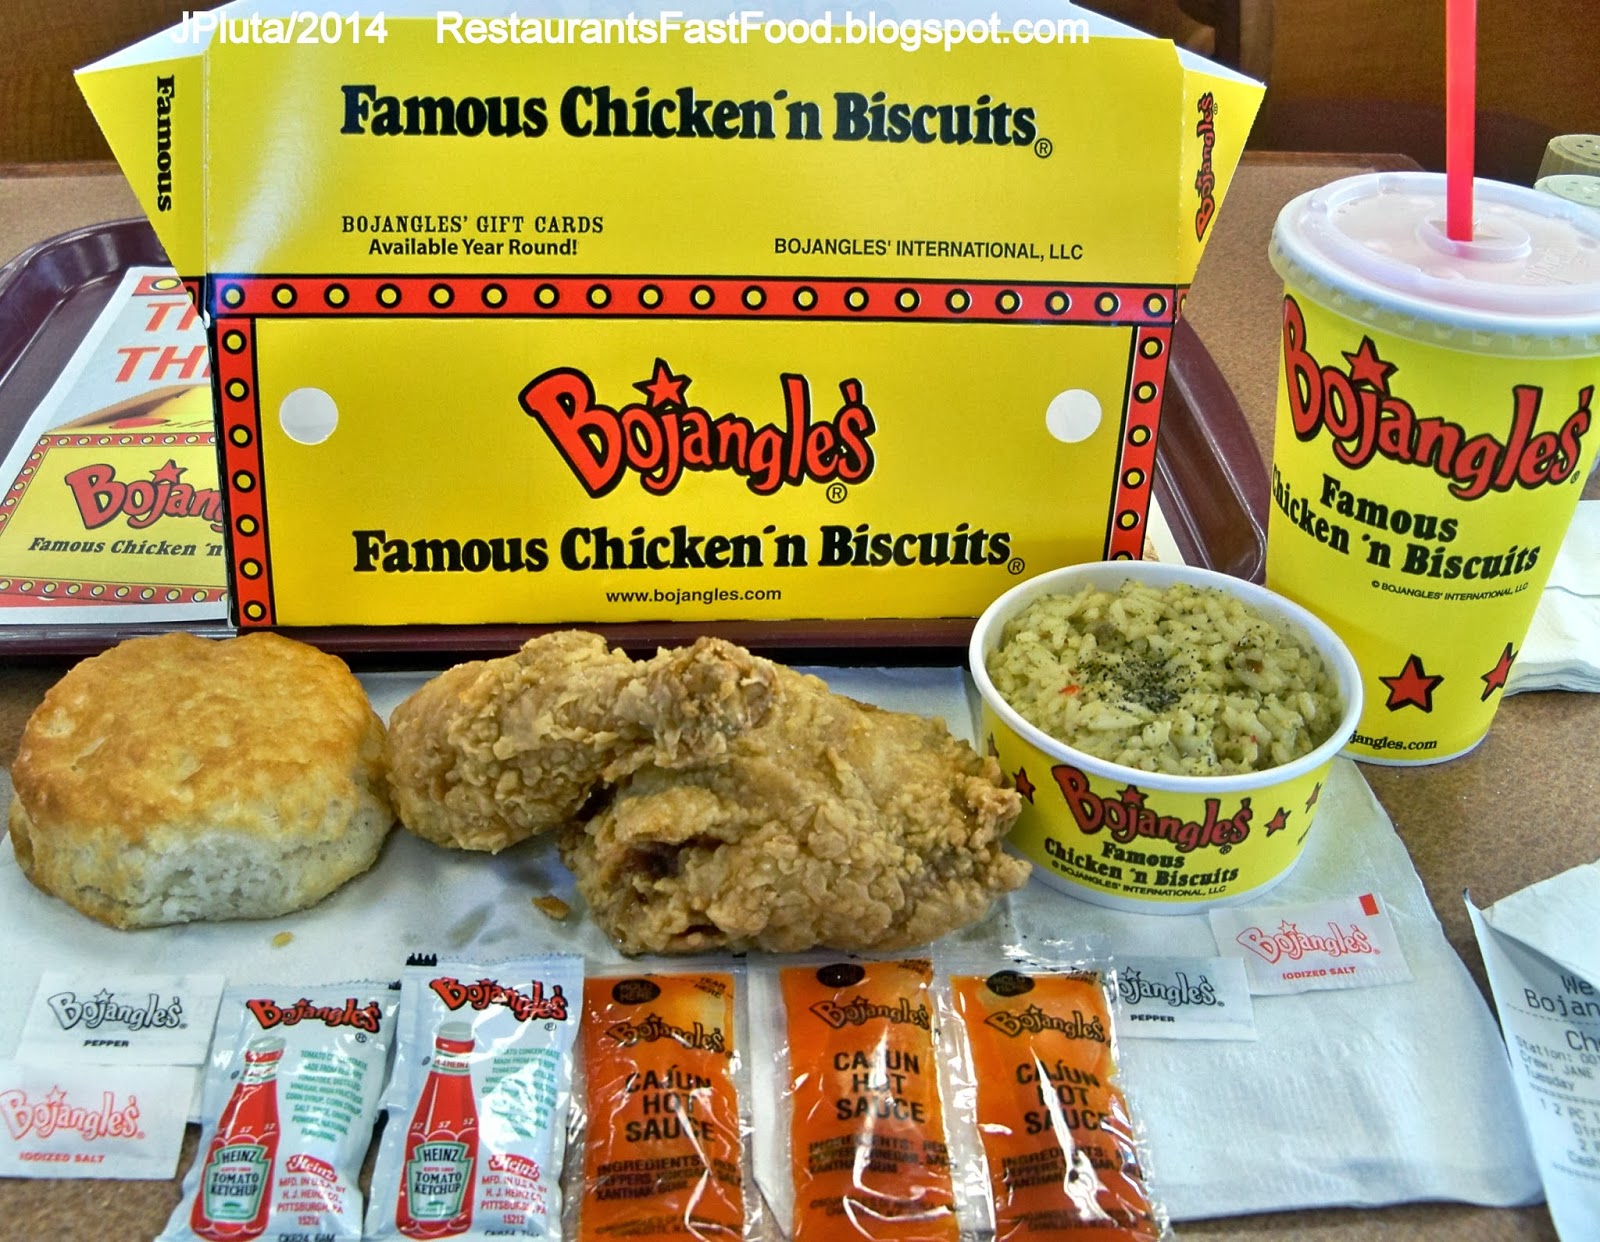 BOJANGLES' Famous Chicken'n Biscuits Fast Food Fried Chicken Rest...